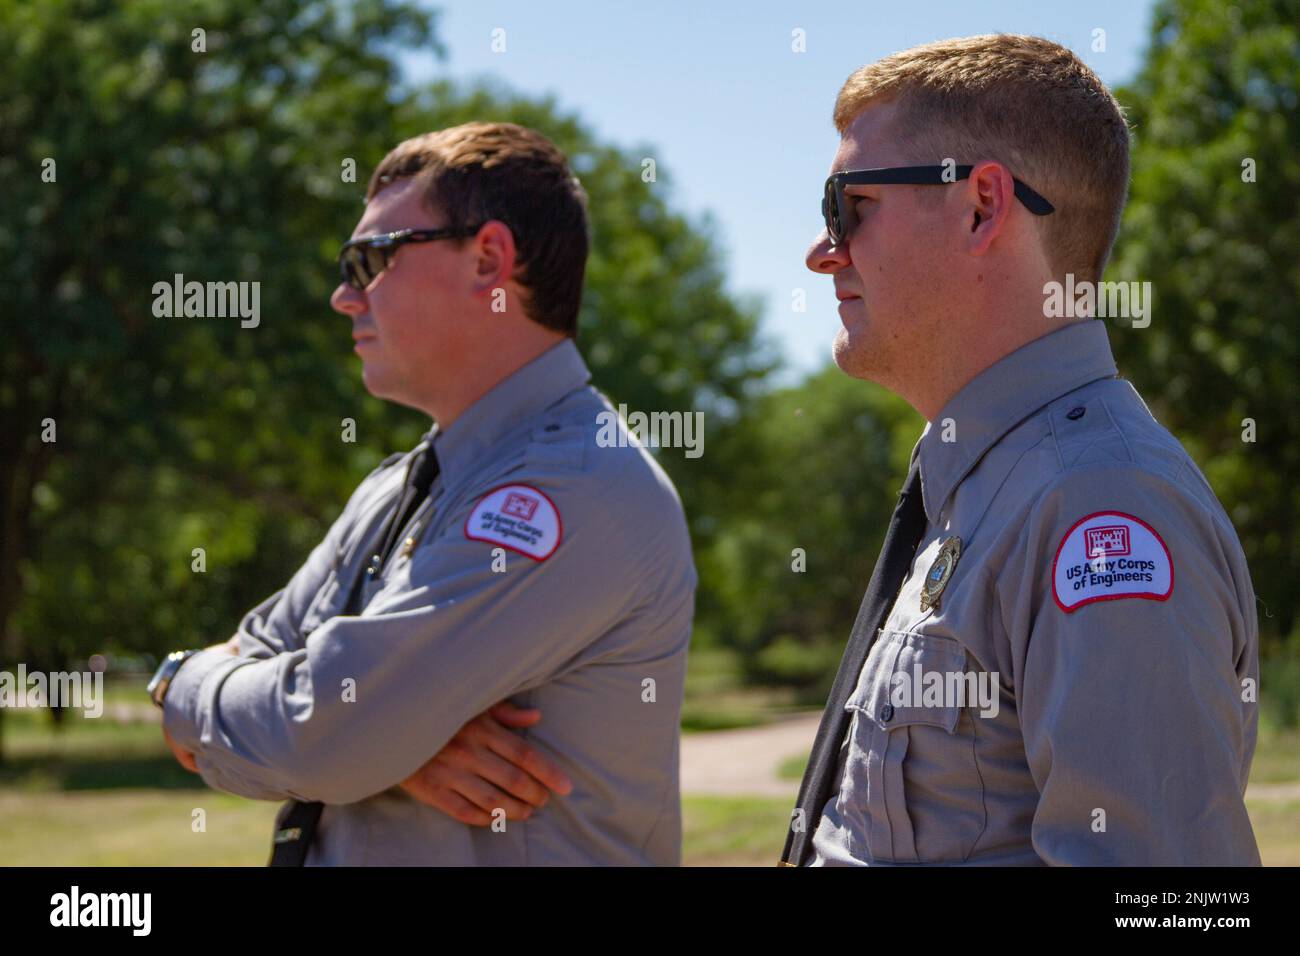 Harlan County Lake Park Rangers Bryson Hellmuth (left) and Ryan Spry (right) listen during Col. Geoff Van Epps', Northwestern Division commander, visit to Harlan County Lake, Nebraska, on Aug. 10, 2022. Col. Van Epps' visit to the Kansas City District included tours of district programs and projects to meet with partners and district staff and to learn how the District is working with the Heartland. Stock Photo